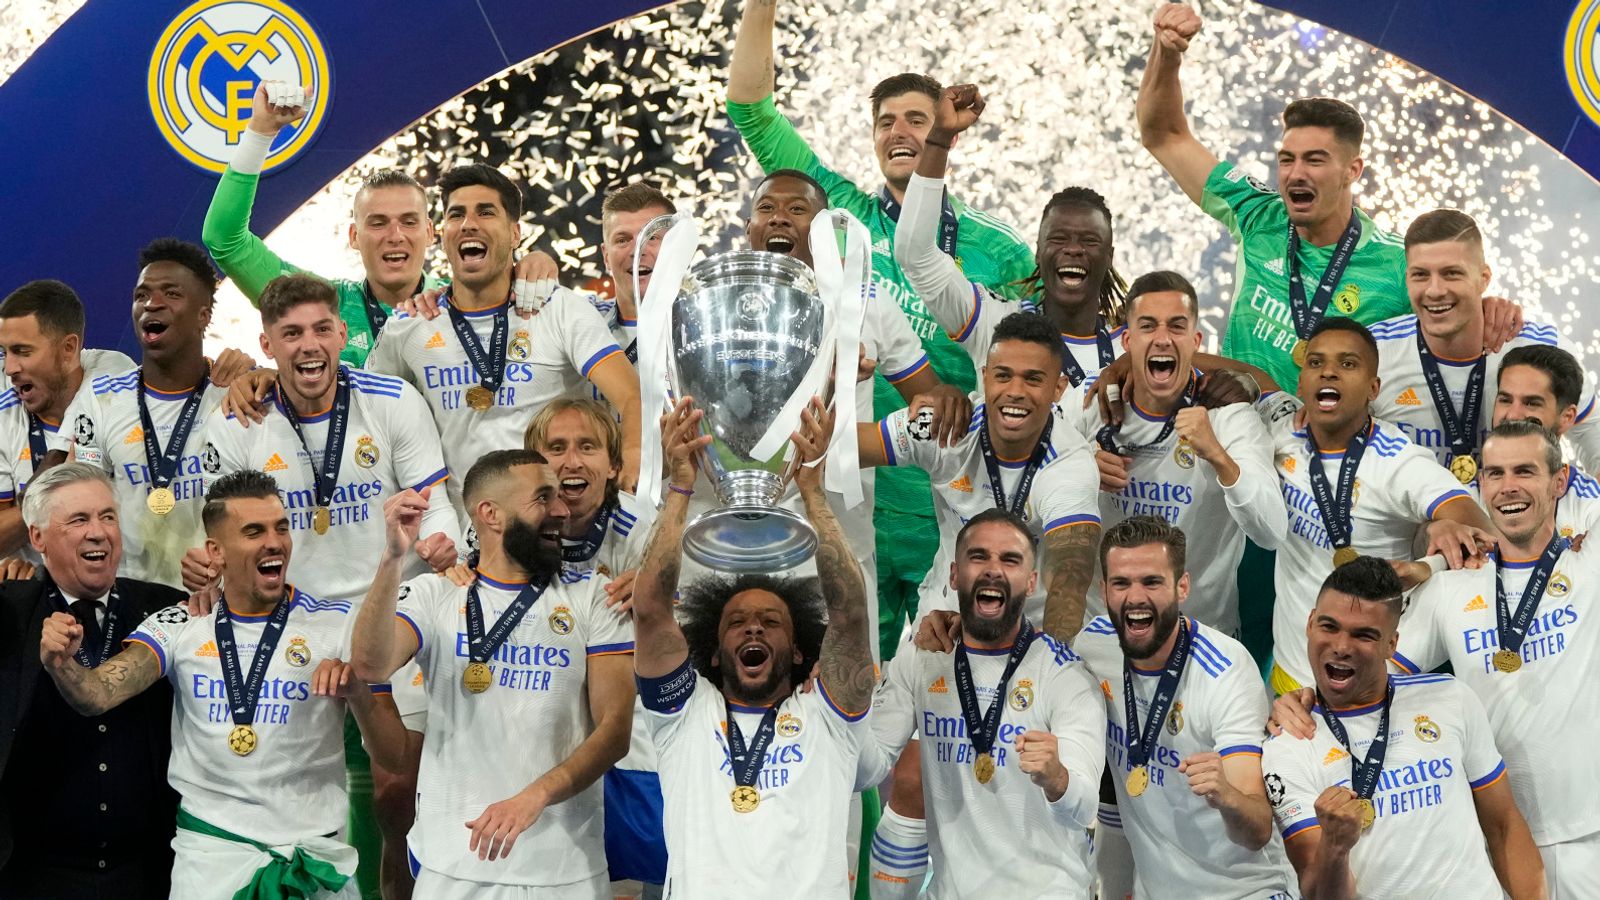 Liverpool 0-1 Real Madrid Vinicius Junior goal downs Reds in Champions League final as chaotic scenes at Stade de France mar game Football News Sky Sports